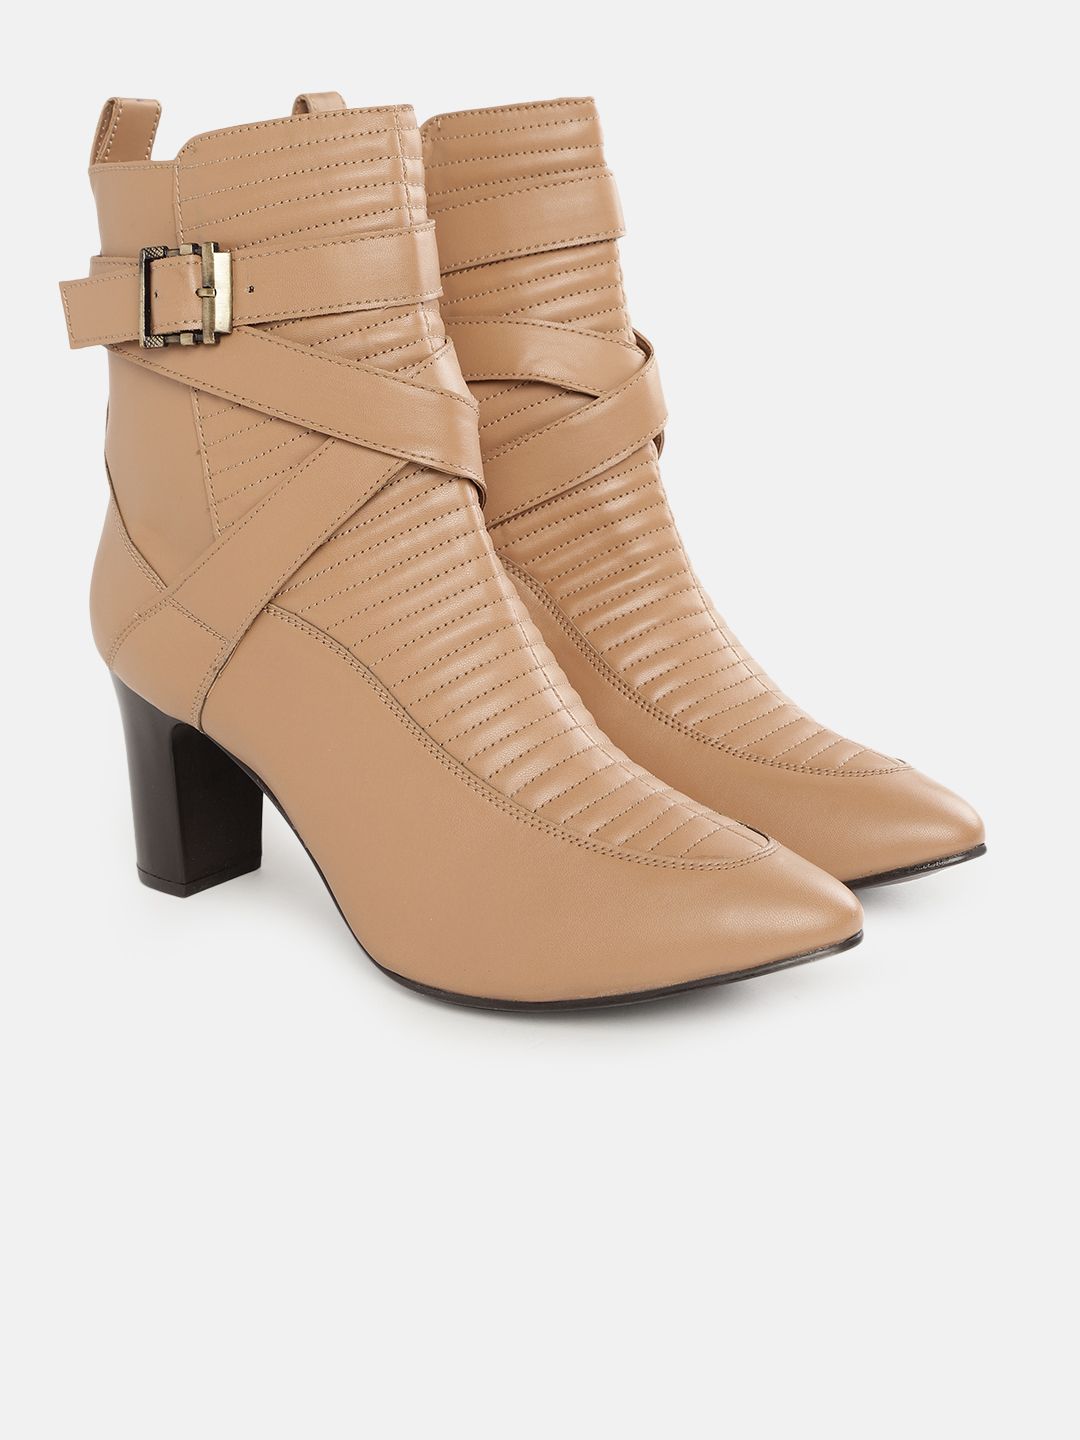 CORSICA Women Beige Self-Striped Heeled Boots Price in India